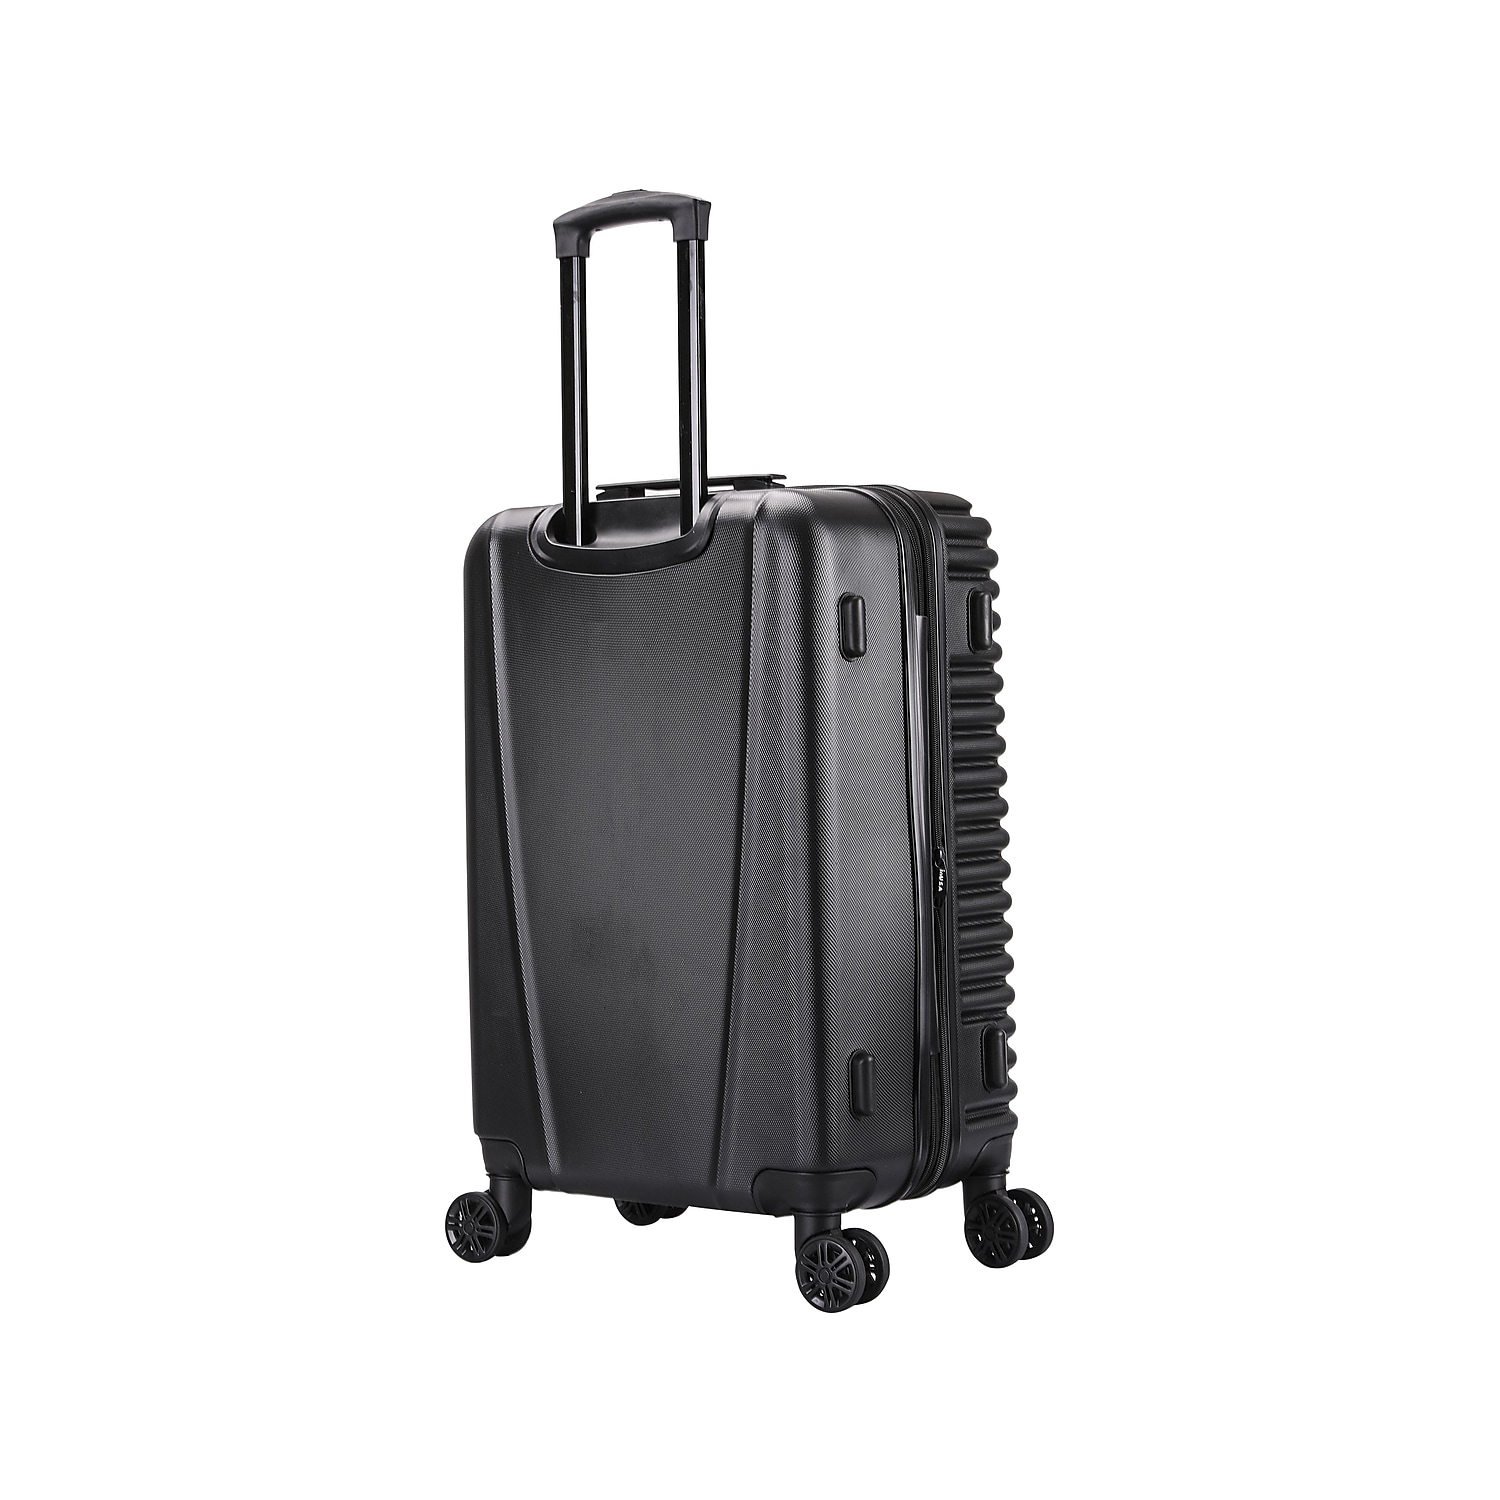 InUSA Ally 24" Hardside Lightweight Luggage with Spinner Wheels, Handle and Trolley, Black - image 5 of 9